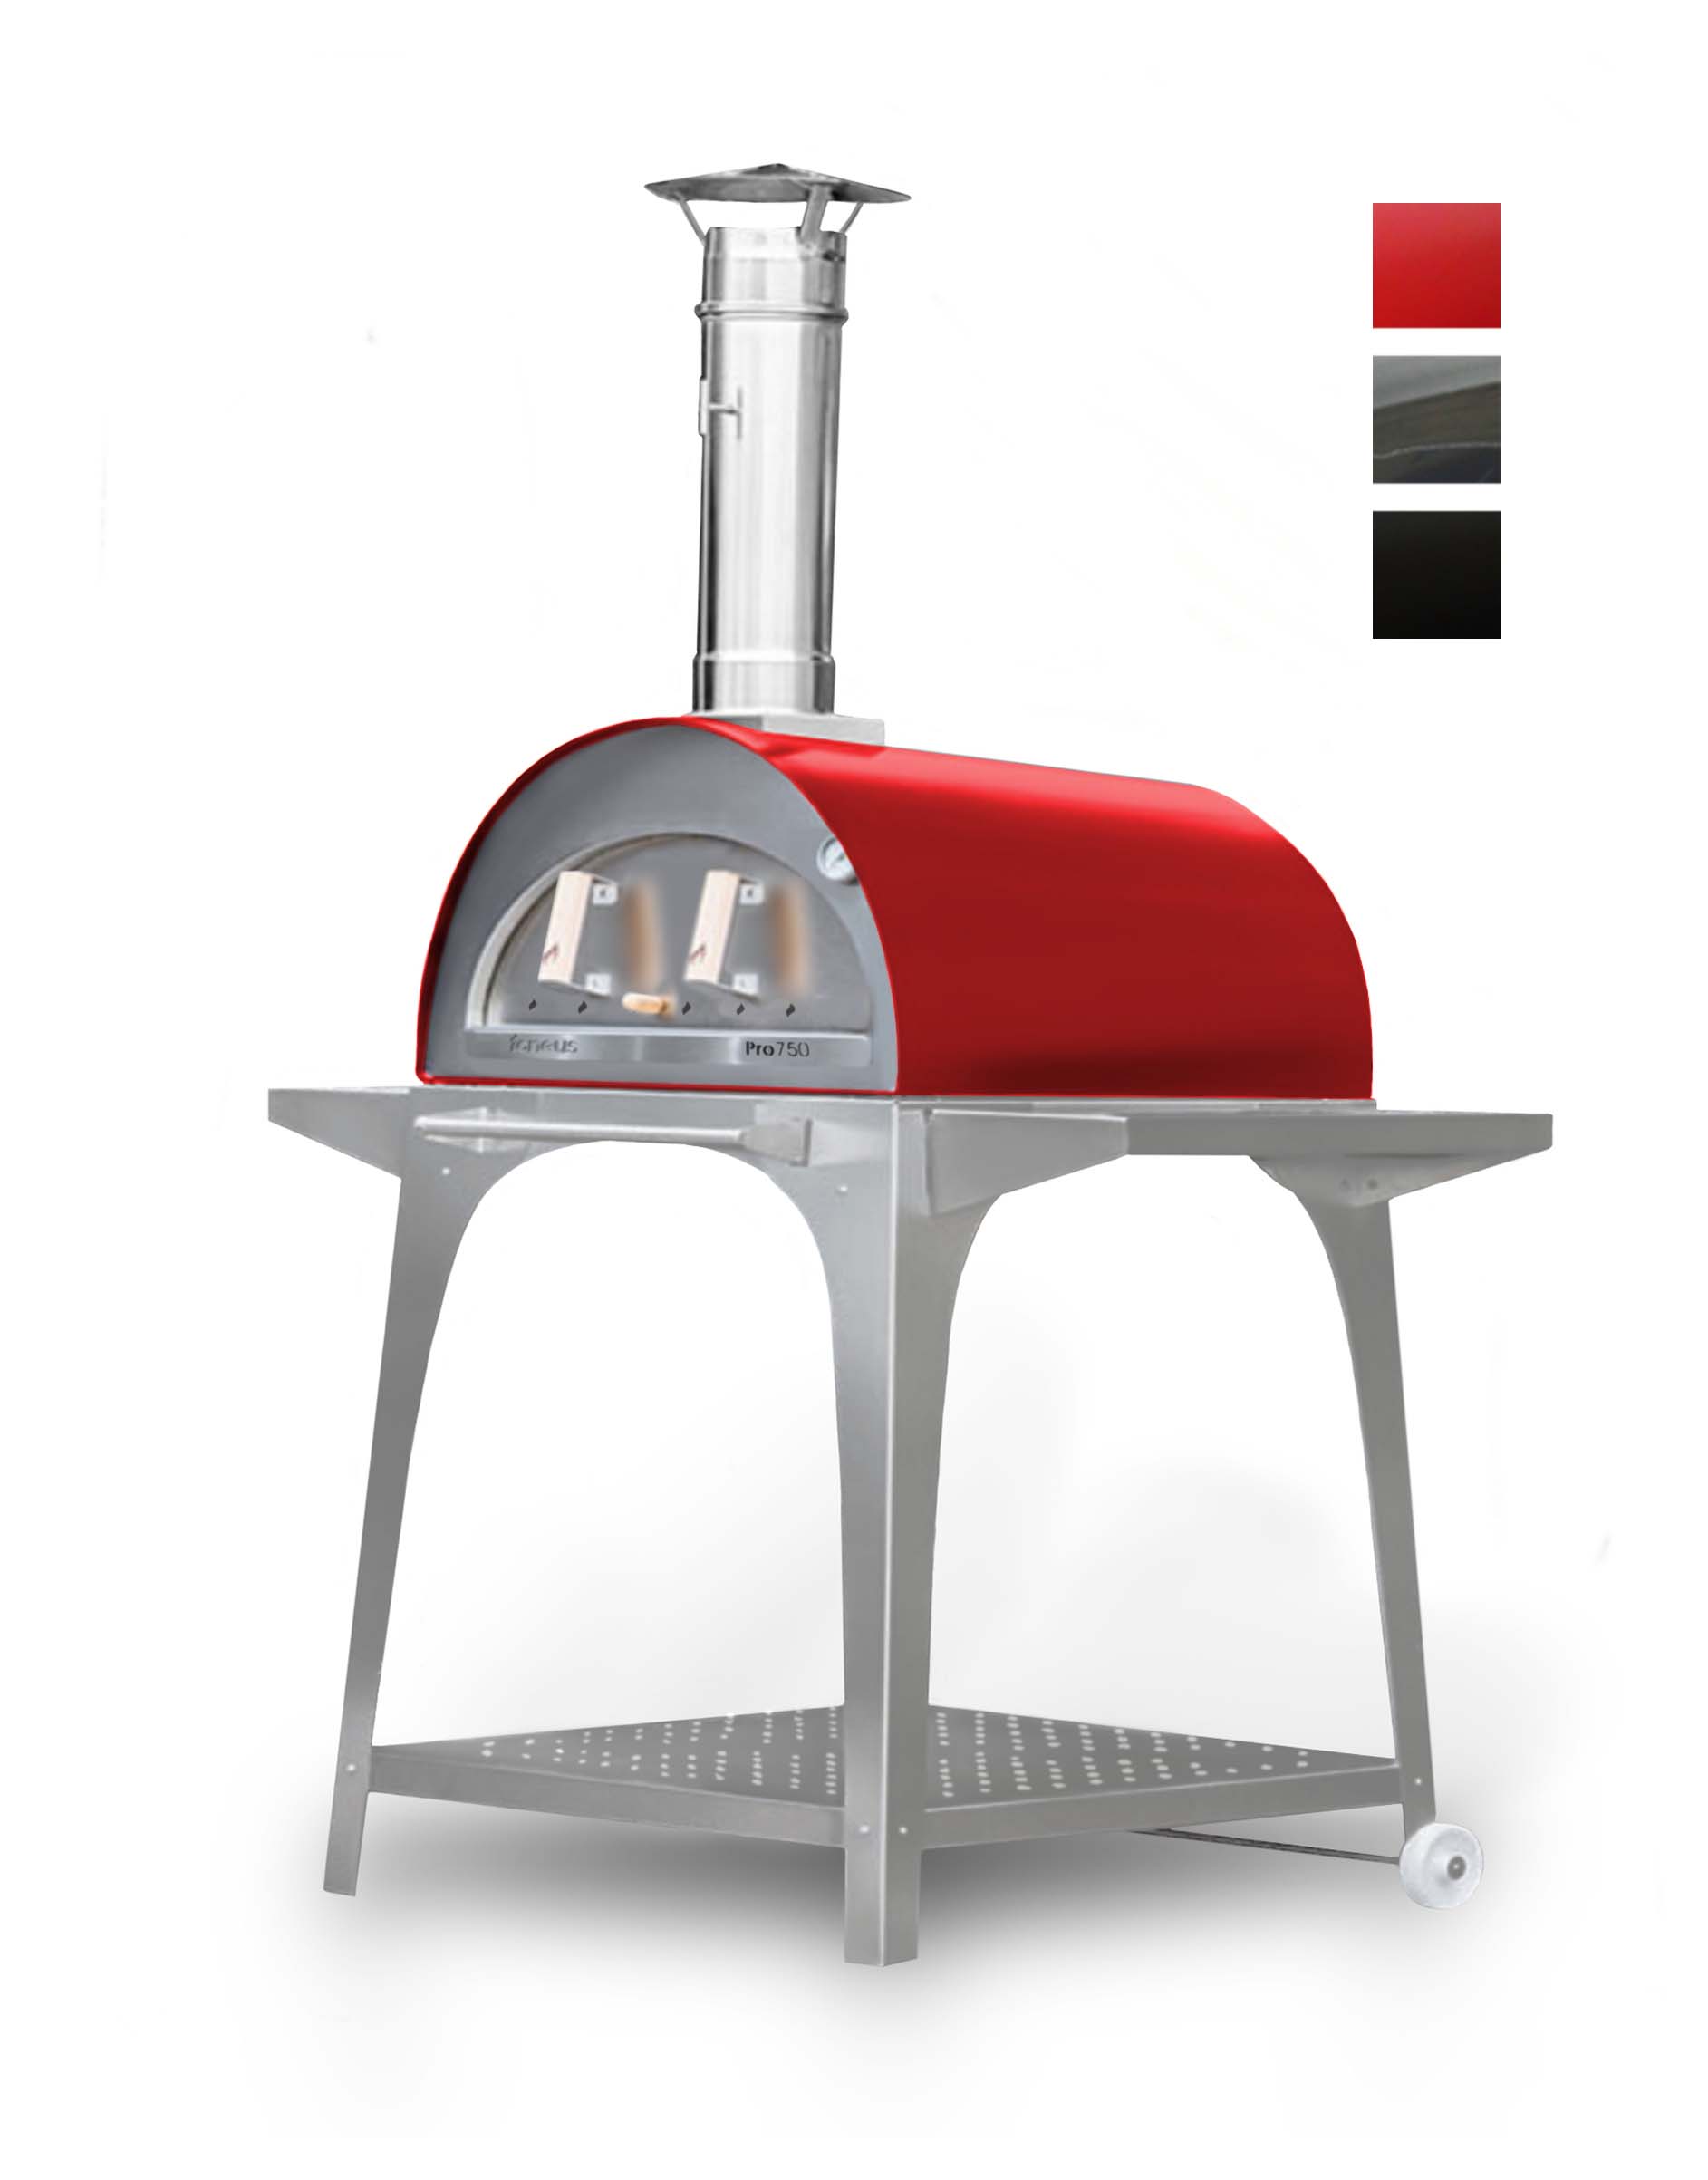 Igneus 750 pizza oven with stand